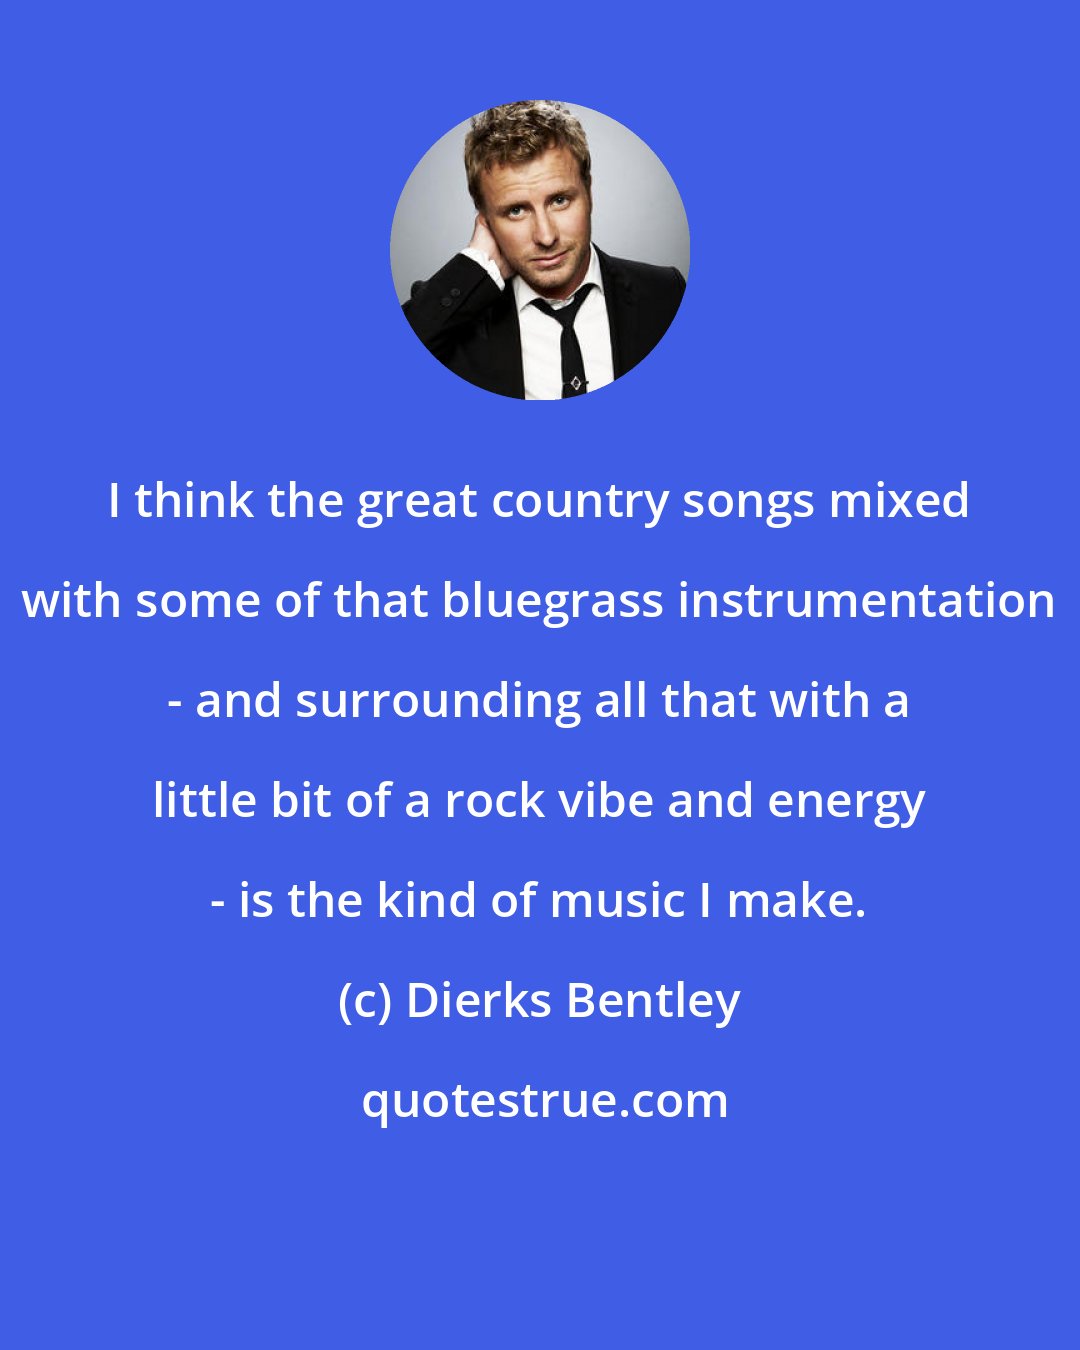 Dierks Bentley: I think the great country songs mixed with some of that bluegrass instrumentation - and surrounding all that with a little bit of a rock vibe and energy - is the kind of music I make.